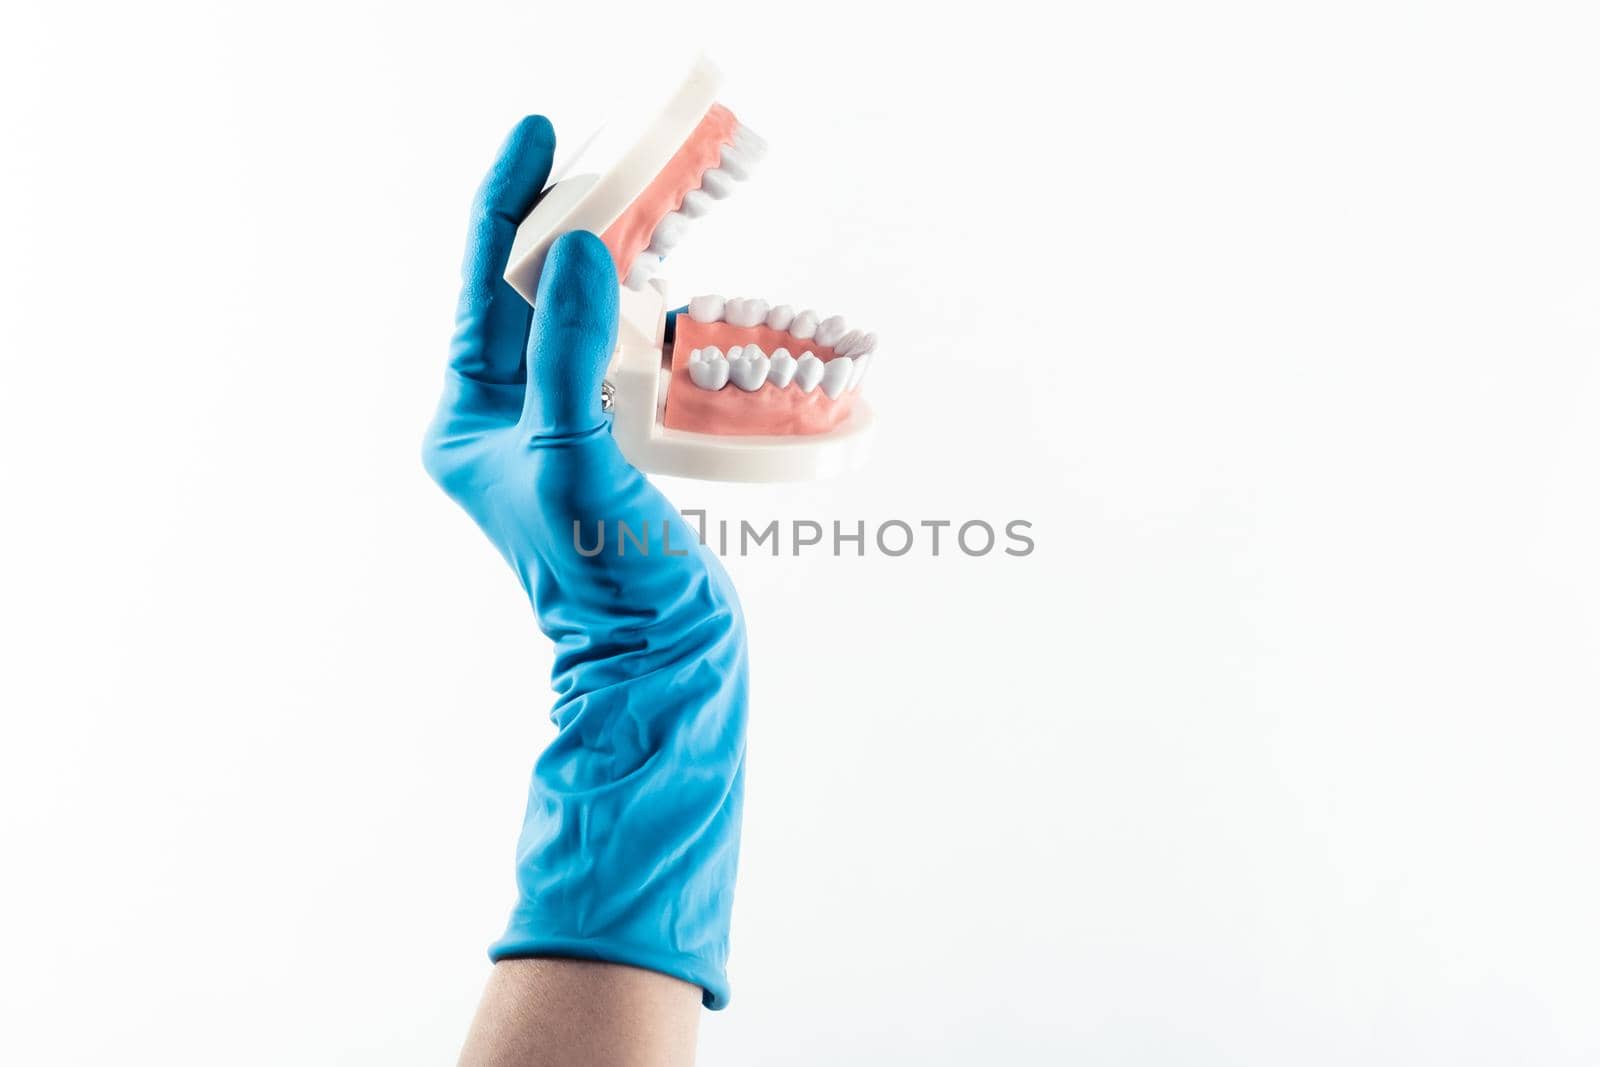 Hand in blue glove holding dental teeth model isolated on white background